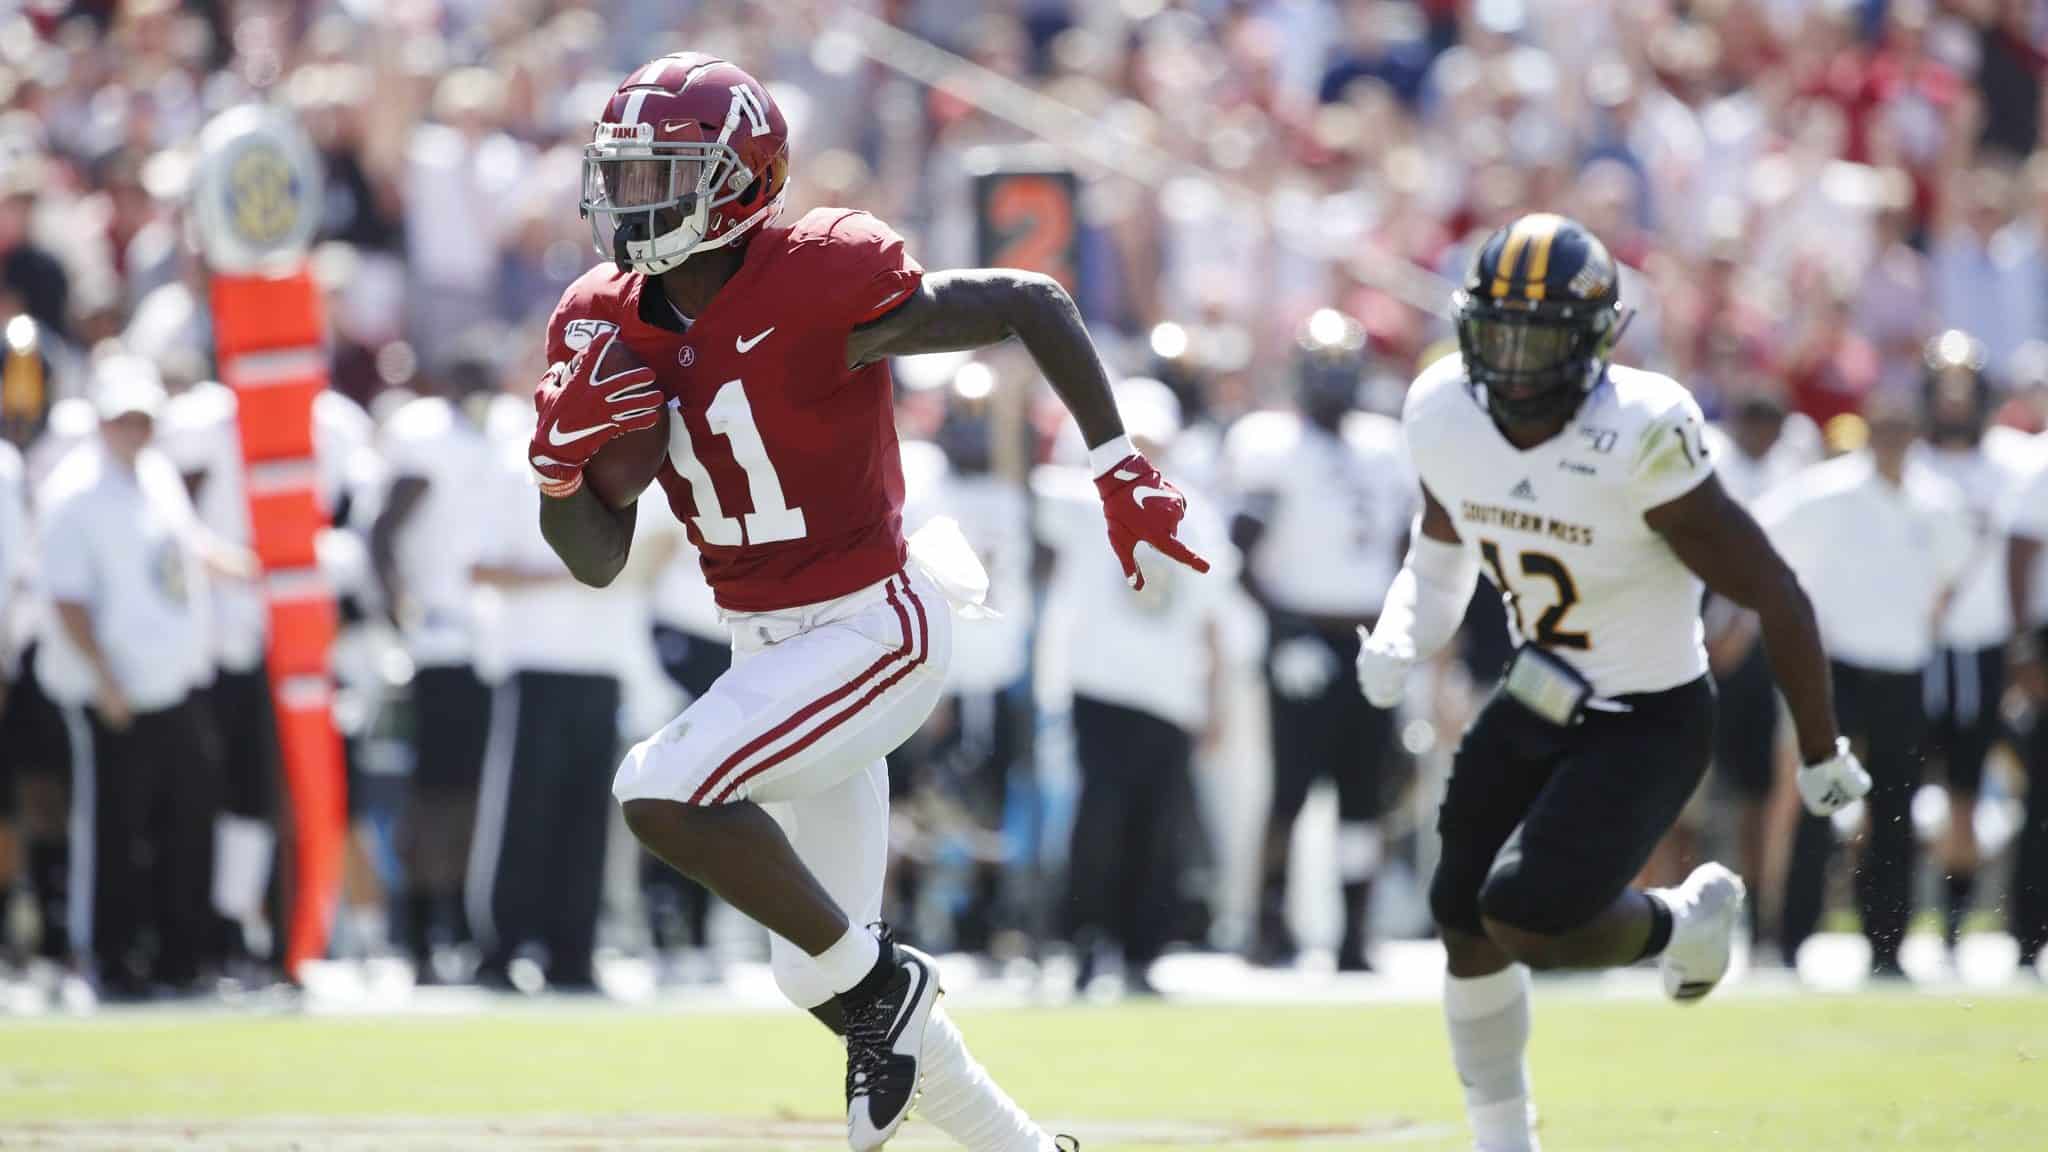 TUSCALOOSA, AL - SEPTEMBER 21: Henry Ruggs III #11 of the Alabama Crimson Tide runs for a 45-yard touchdown in the first quarter after catching a pass behind D.Q. Thomas #12 of the Southern Mississippi Golden Eagles at Bryant-Denny Stadium on September 21, 2019 in Tuscaloosa, Alabama. (